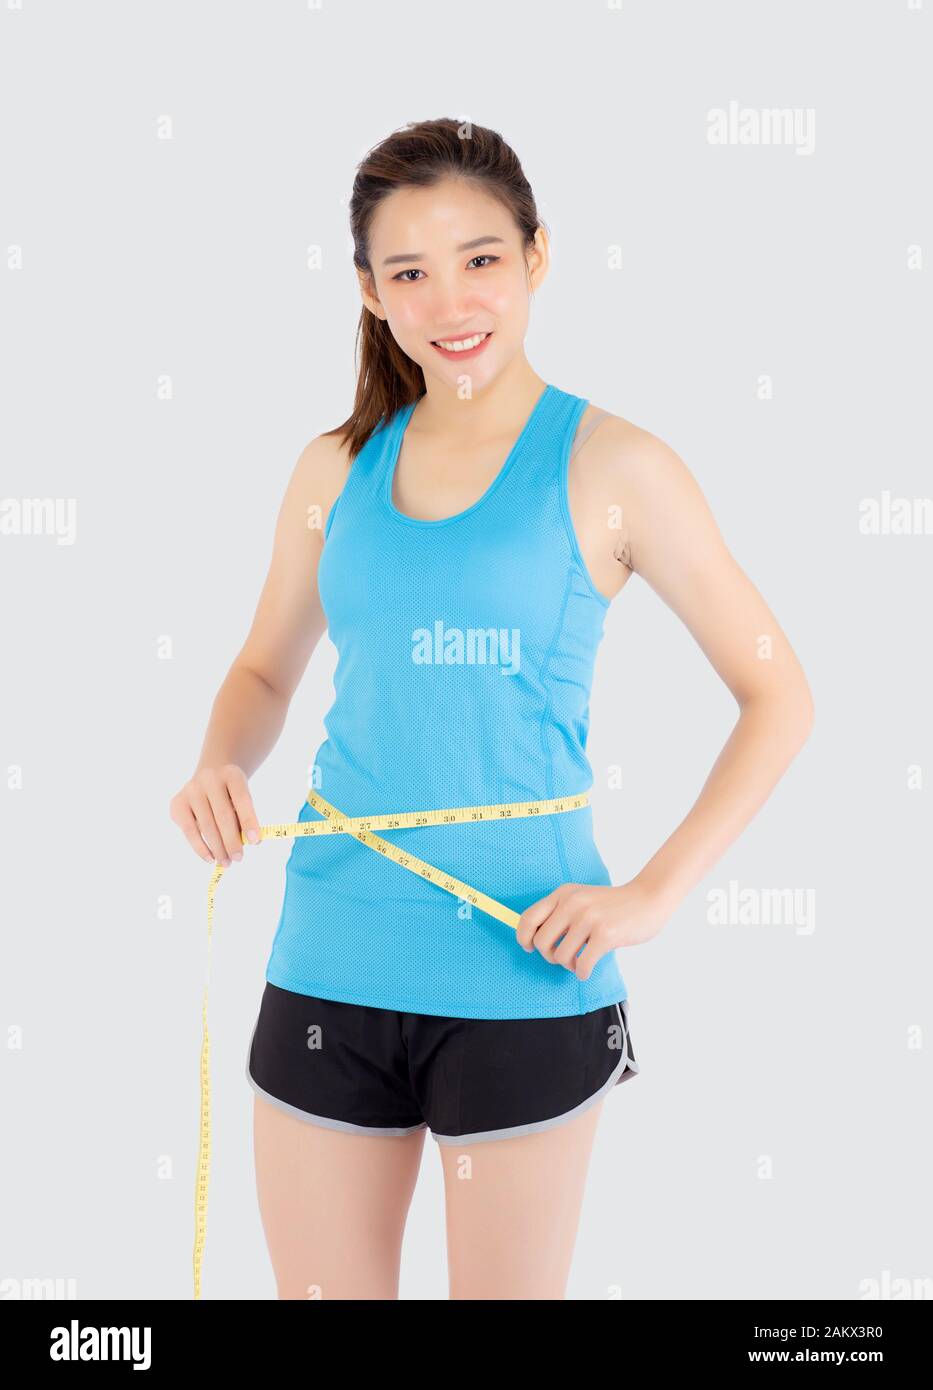 Fitness Body And A Thin Waist Stock Photo, Picture and Royalty